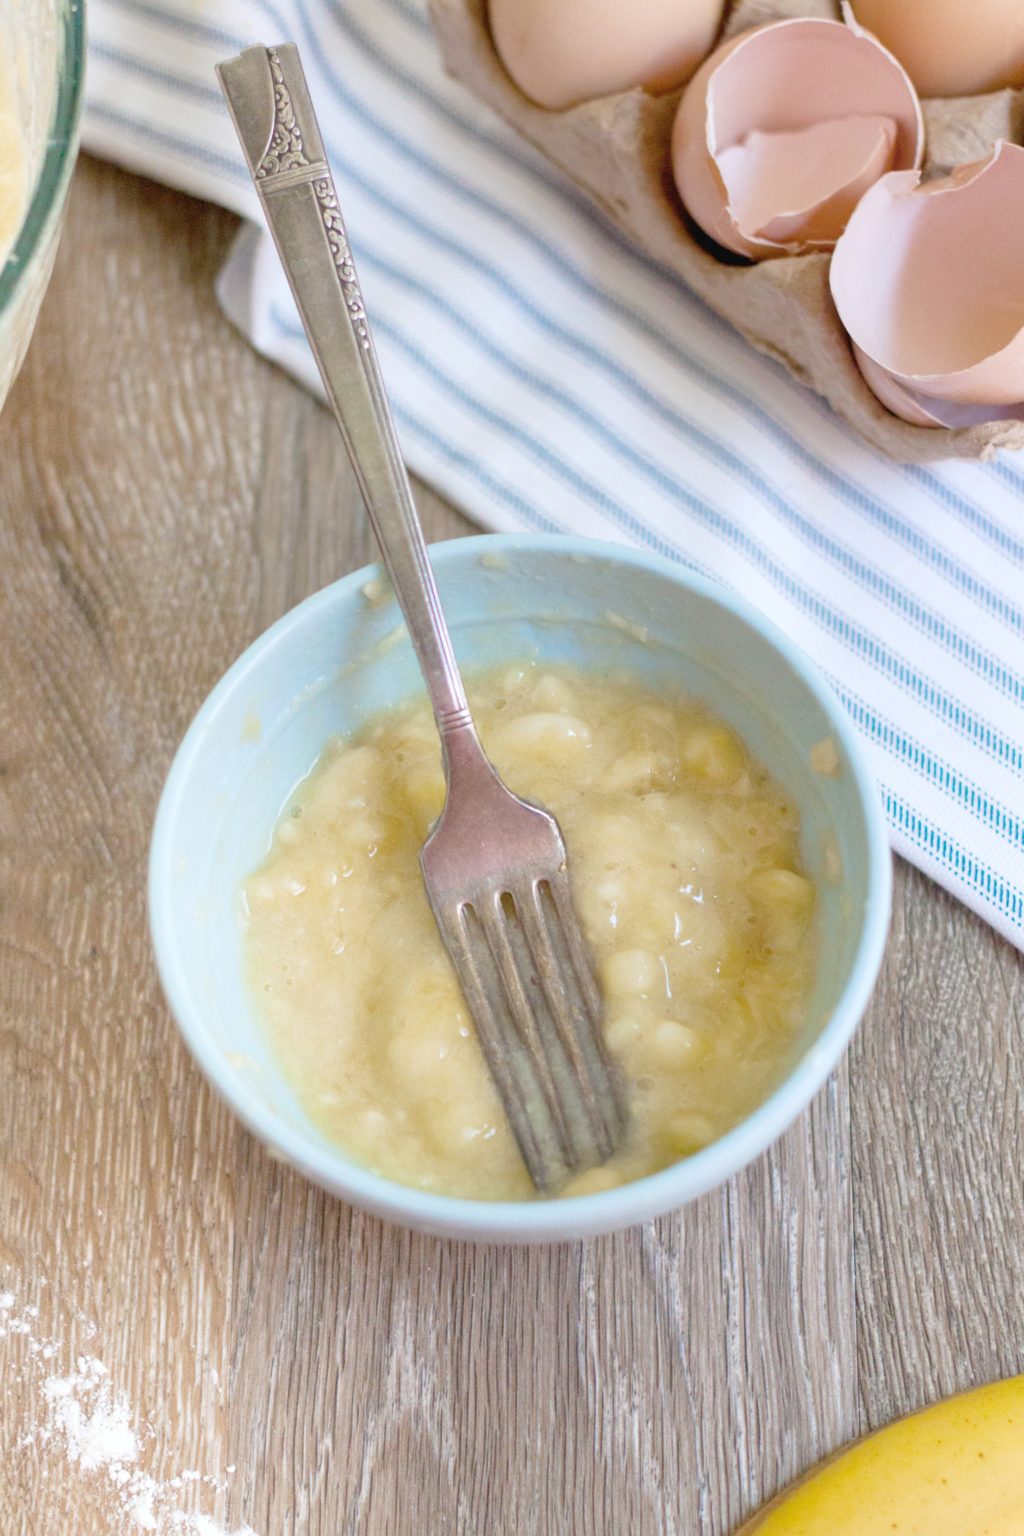 Banana is mashed with a fork in a small bowl.